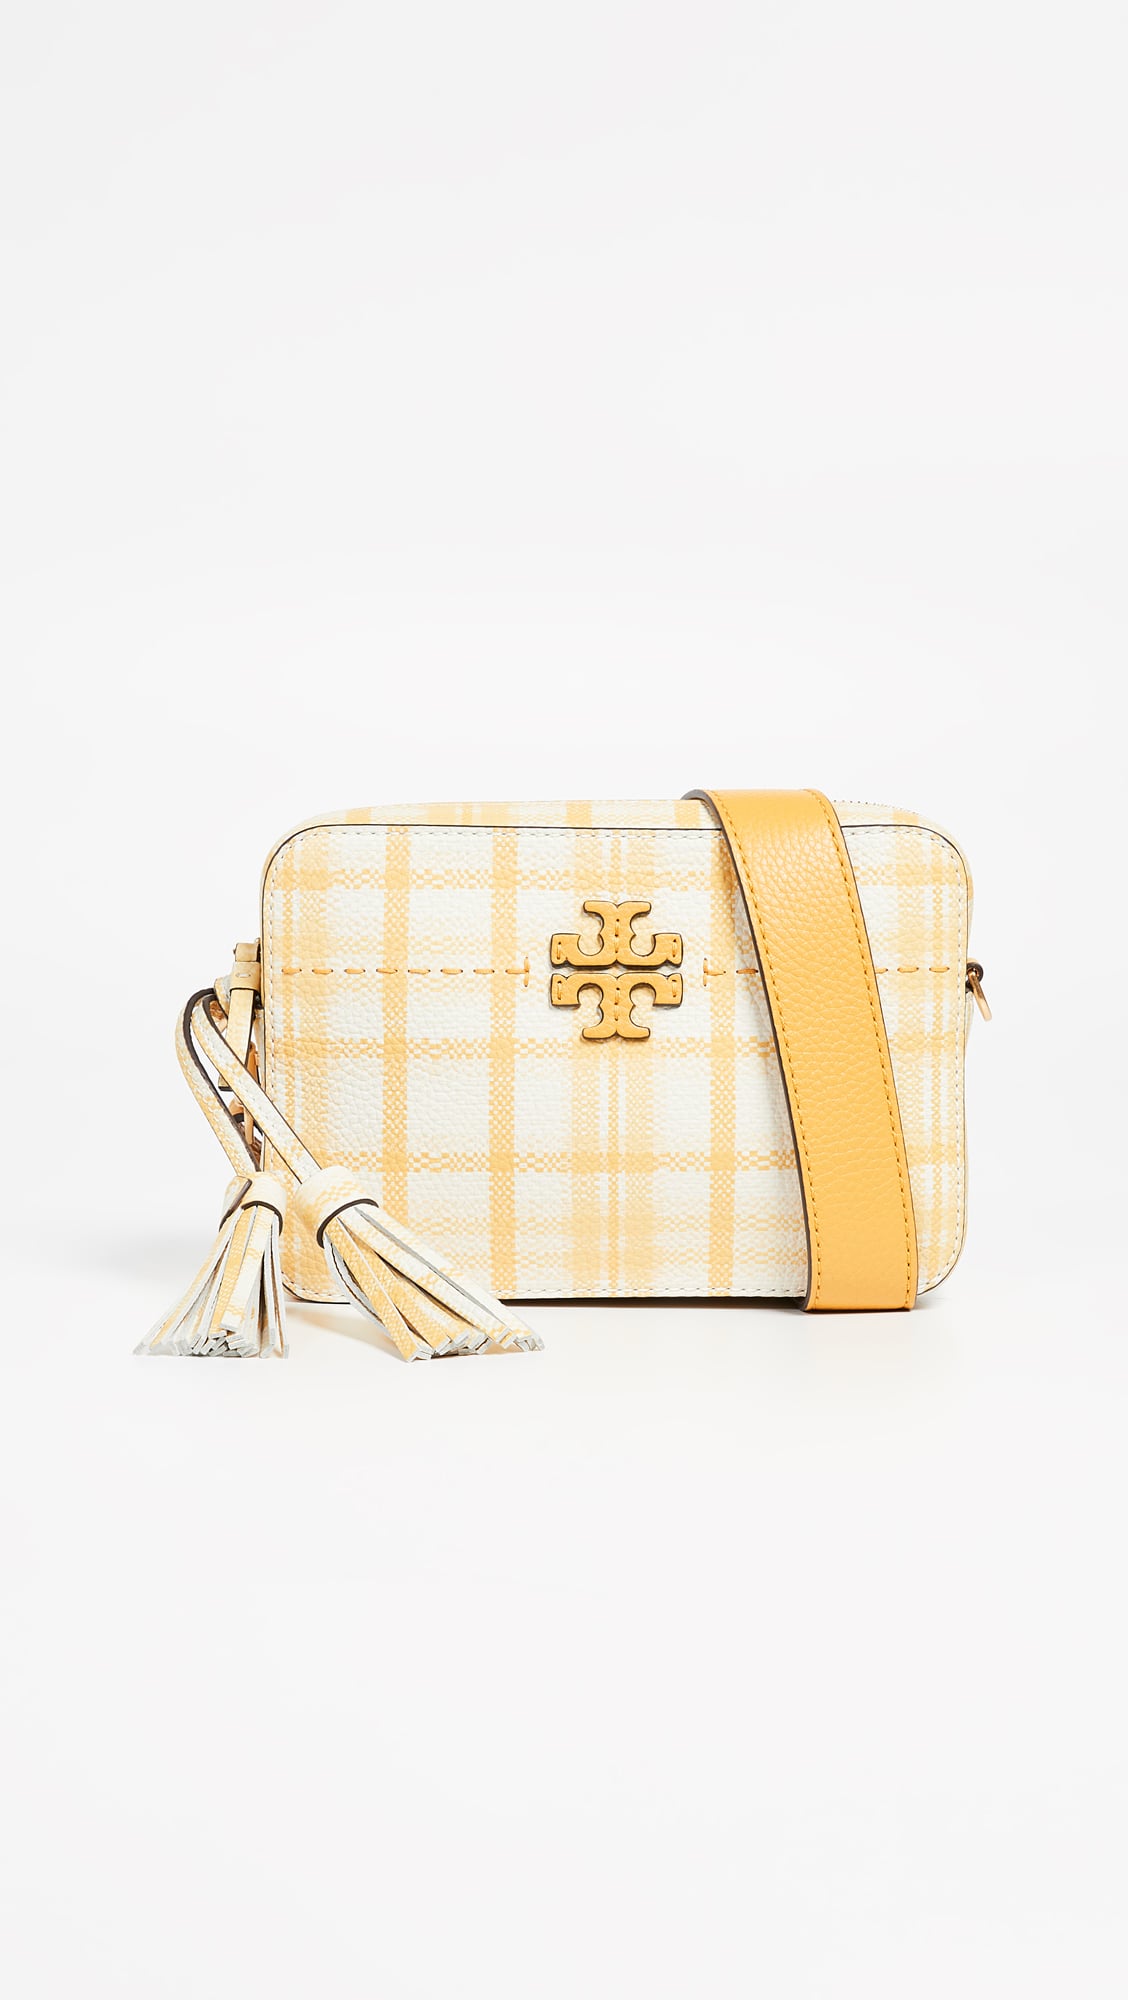 Tory Burch McGraw Plaid Camera Bag | 7 Spring Bag Trends That'll Make You  Skip With Glee — at Every Price | POPSUGAR Fashion Photo 44